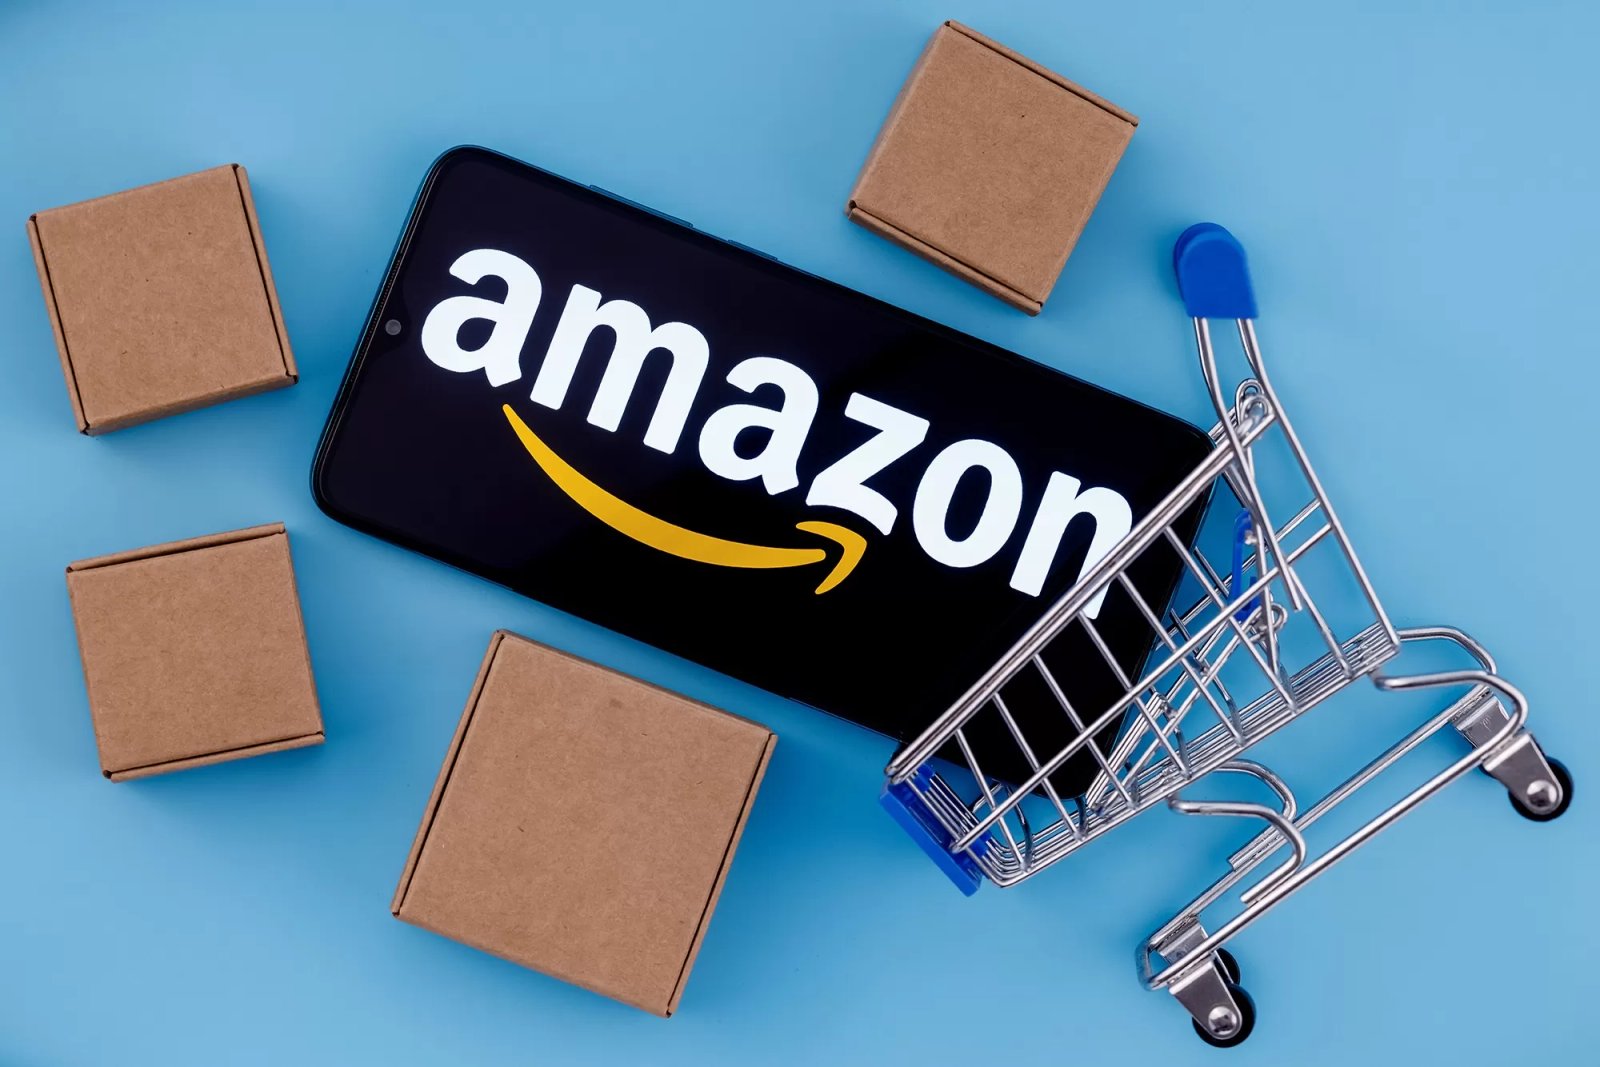 How Can Amazon Account Management Services Improve Product Listings and Descriptions?